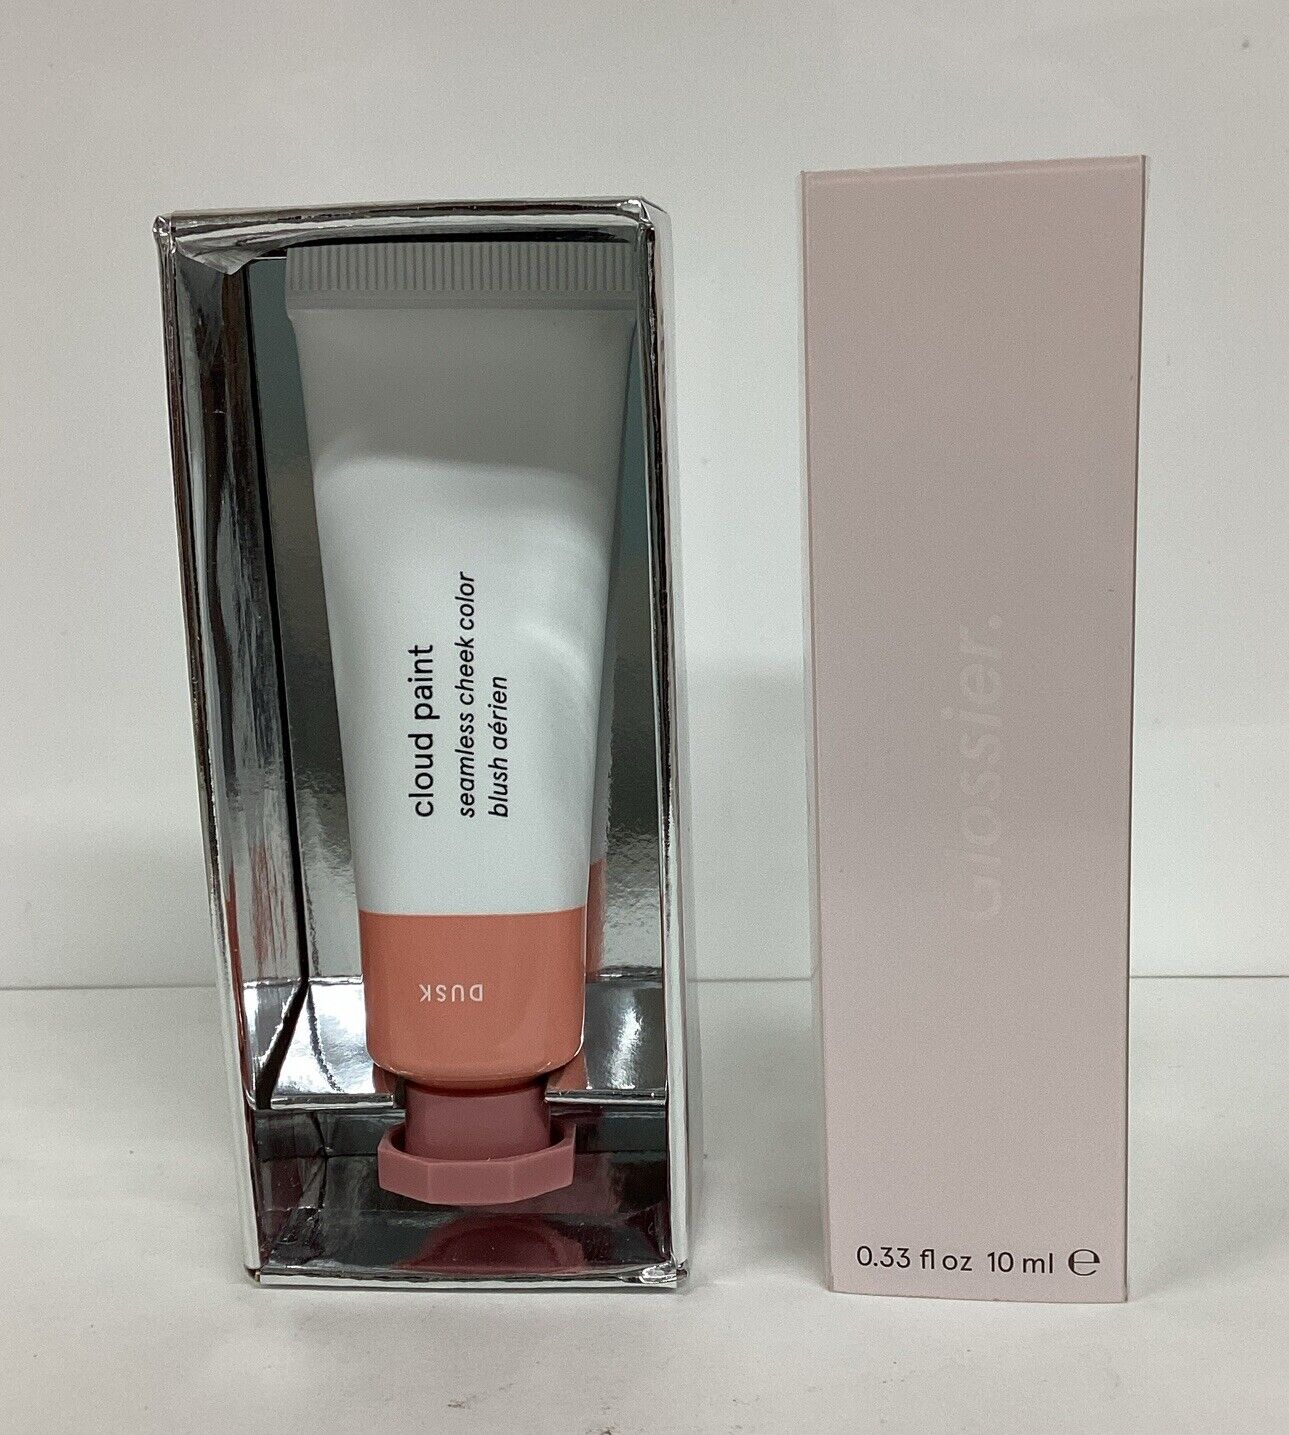 Glossier Cloud Paint DUSK Seamless Cheek Color Blush 0.33oz As Pictured, New